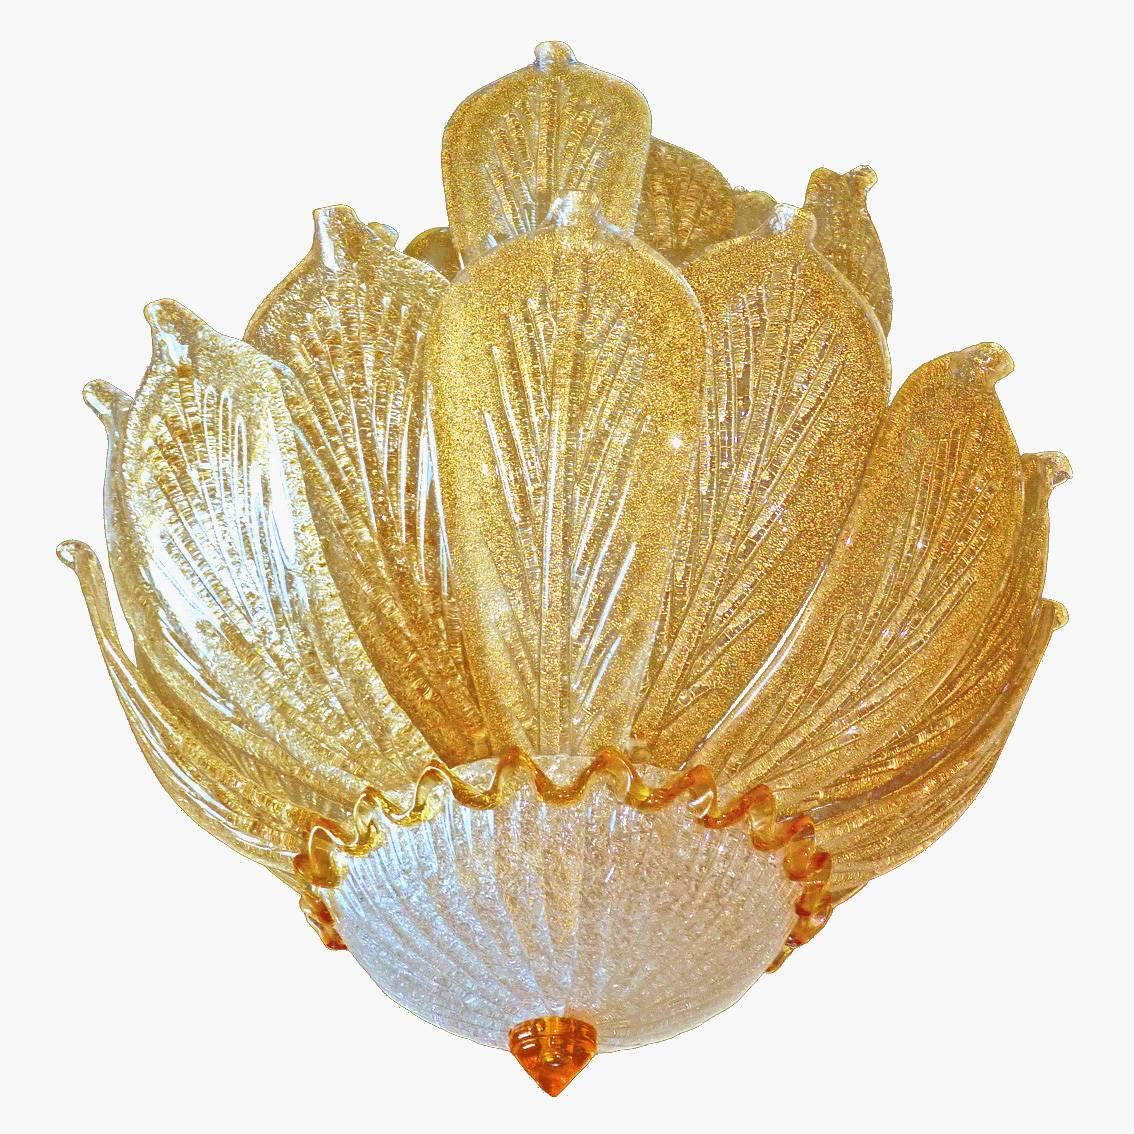 Impressive stunning and rare 26 gold leaf Venetian Murano chandelier by Barovier & Toso. Handblown textured crystal sparkling glass with gold inclusion. This gorgeous light fixture is suspended by a High Quality 24-karat gold-plated brass